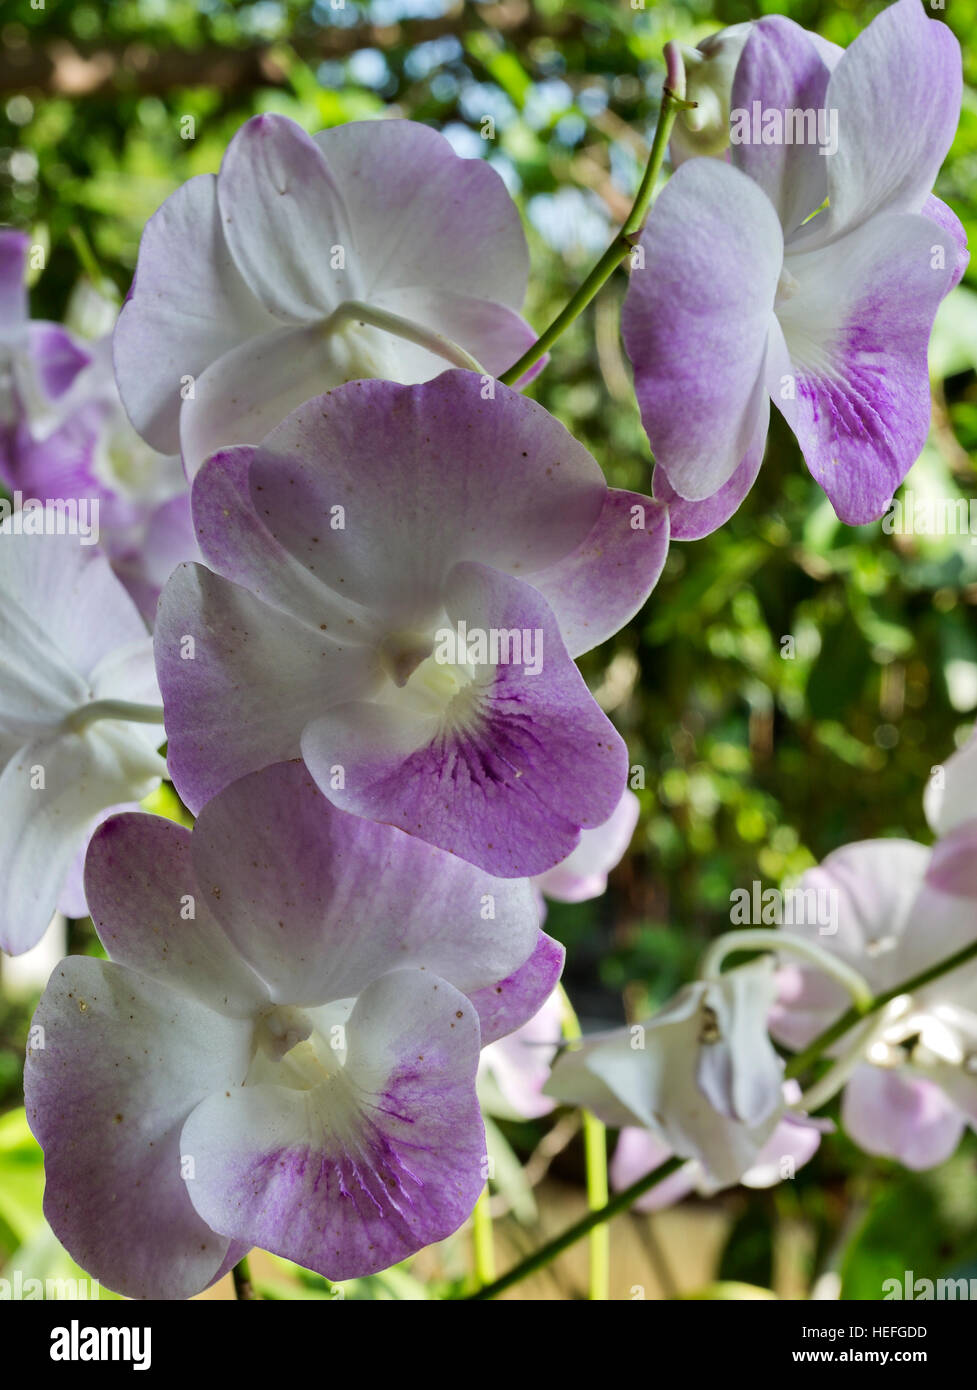 Common Thai purple orchid flower belonging to the Orchidaceae, a diverse and widespread family of flowering plants Stock Photo